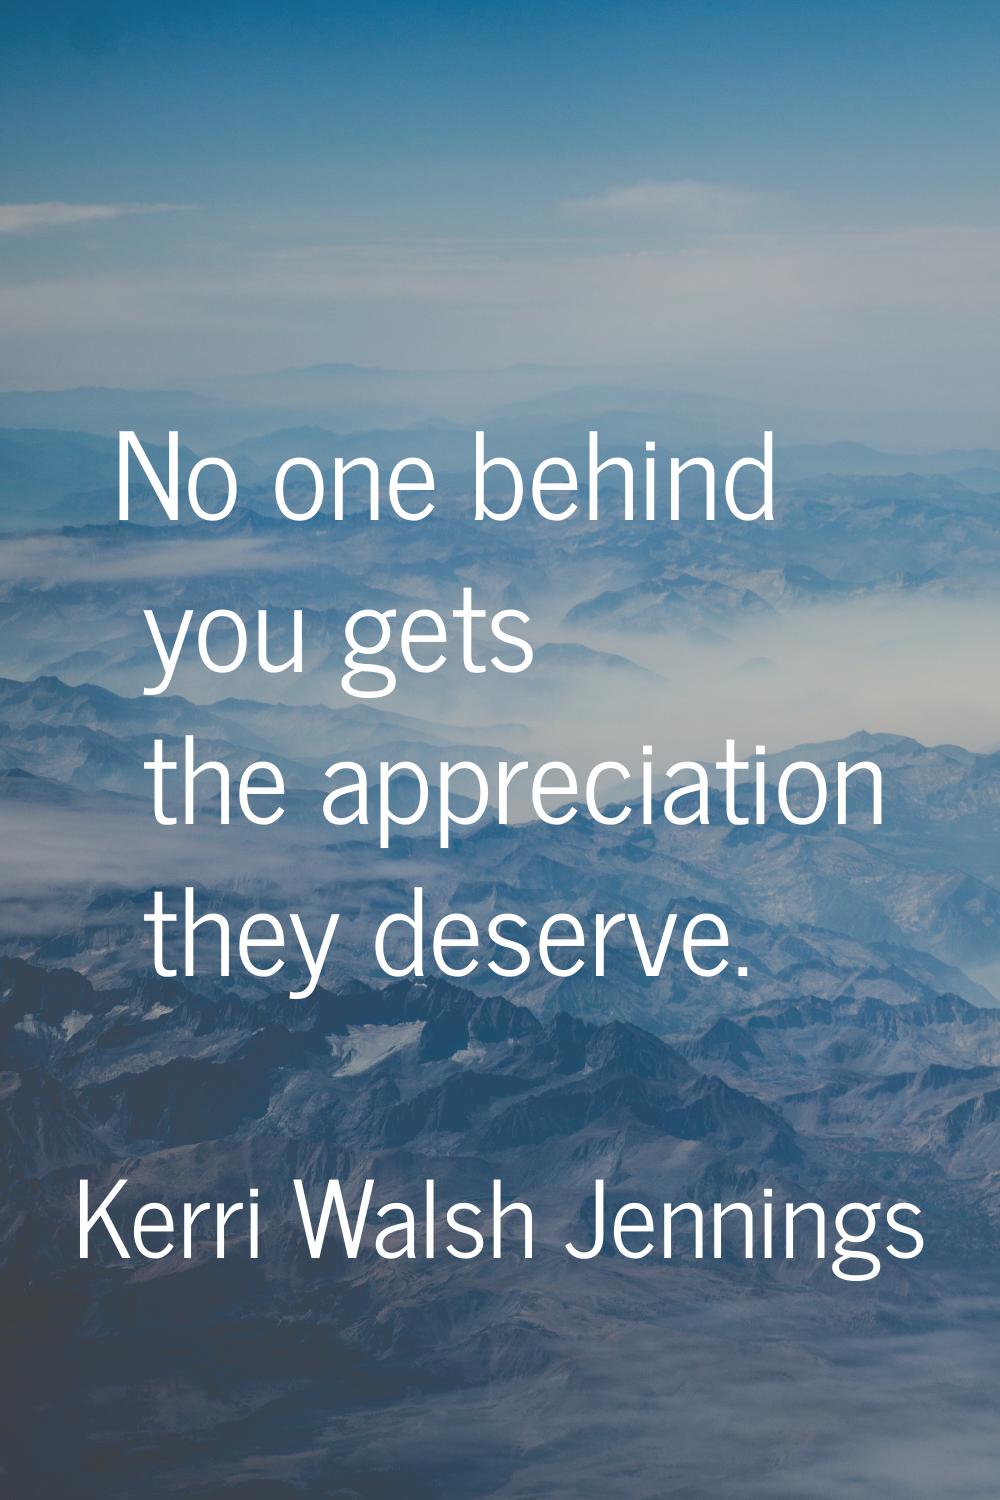 No one behind you gets the appreciation they deserve.